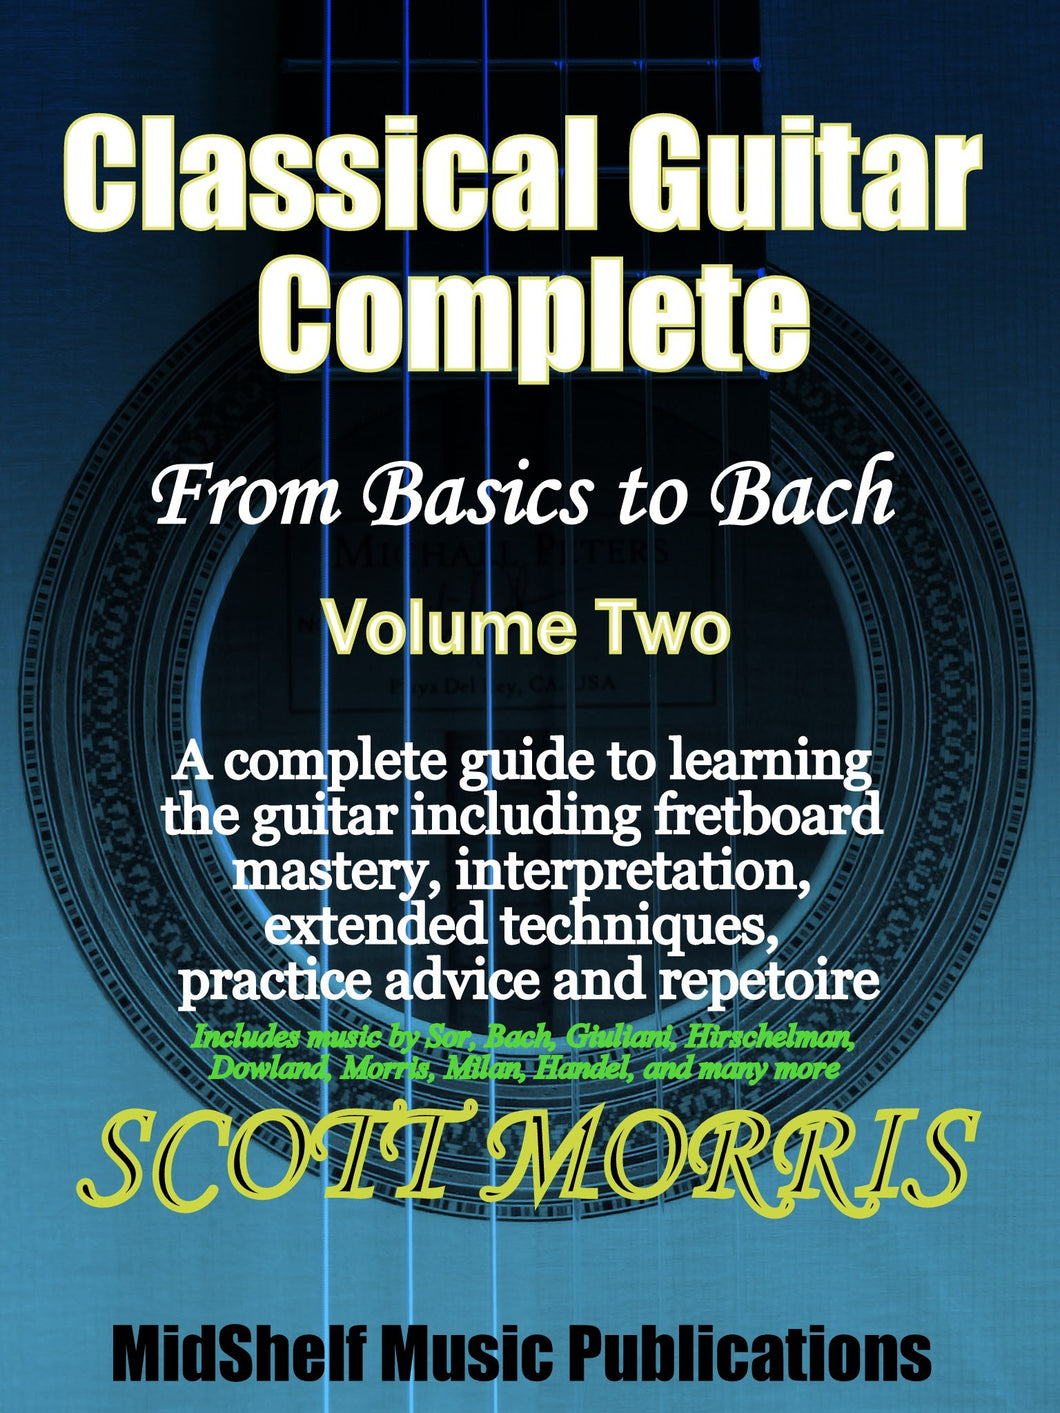 Classical Guitar Complete: From Basics to Bach Volume Two   Digital  Version